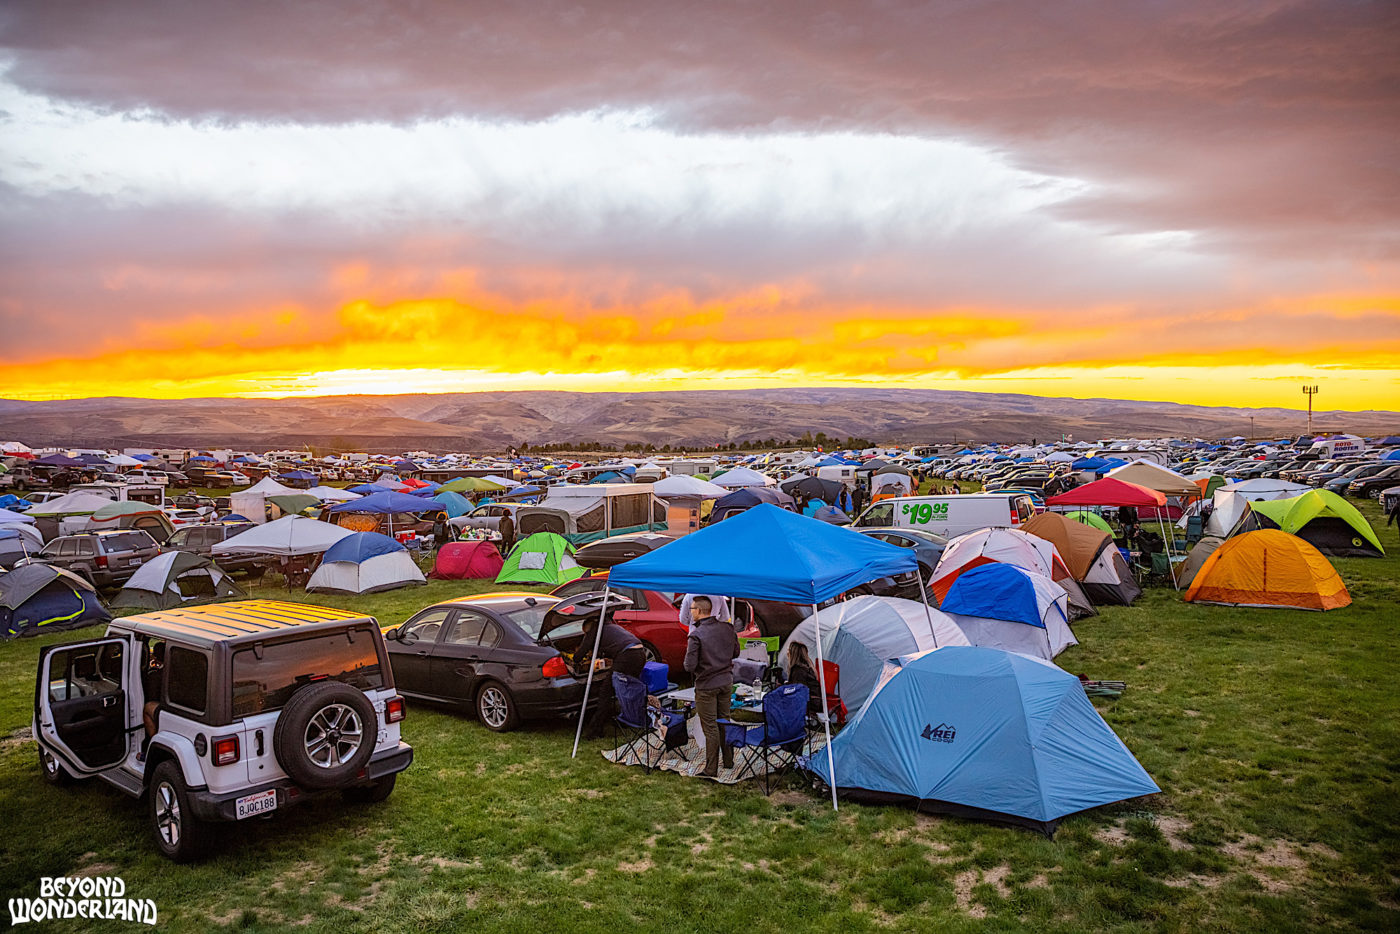 A campground full of cars, canopies, and tents, with the sun setting in the distance.